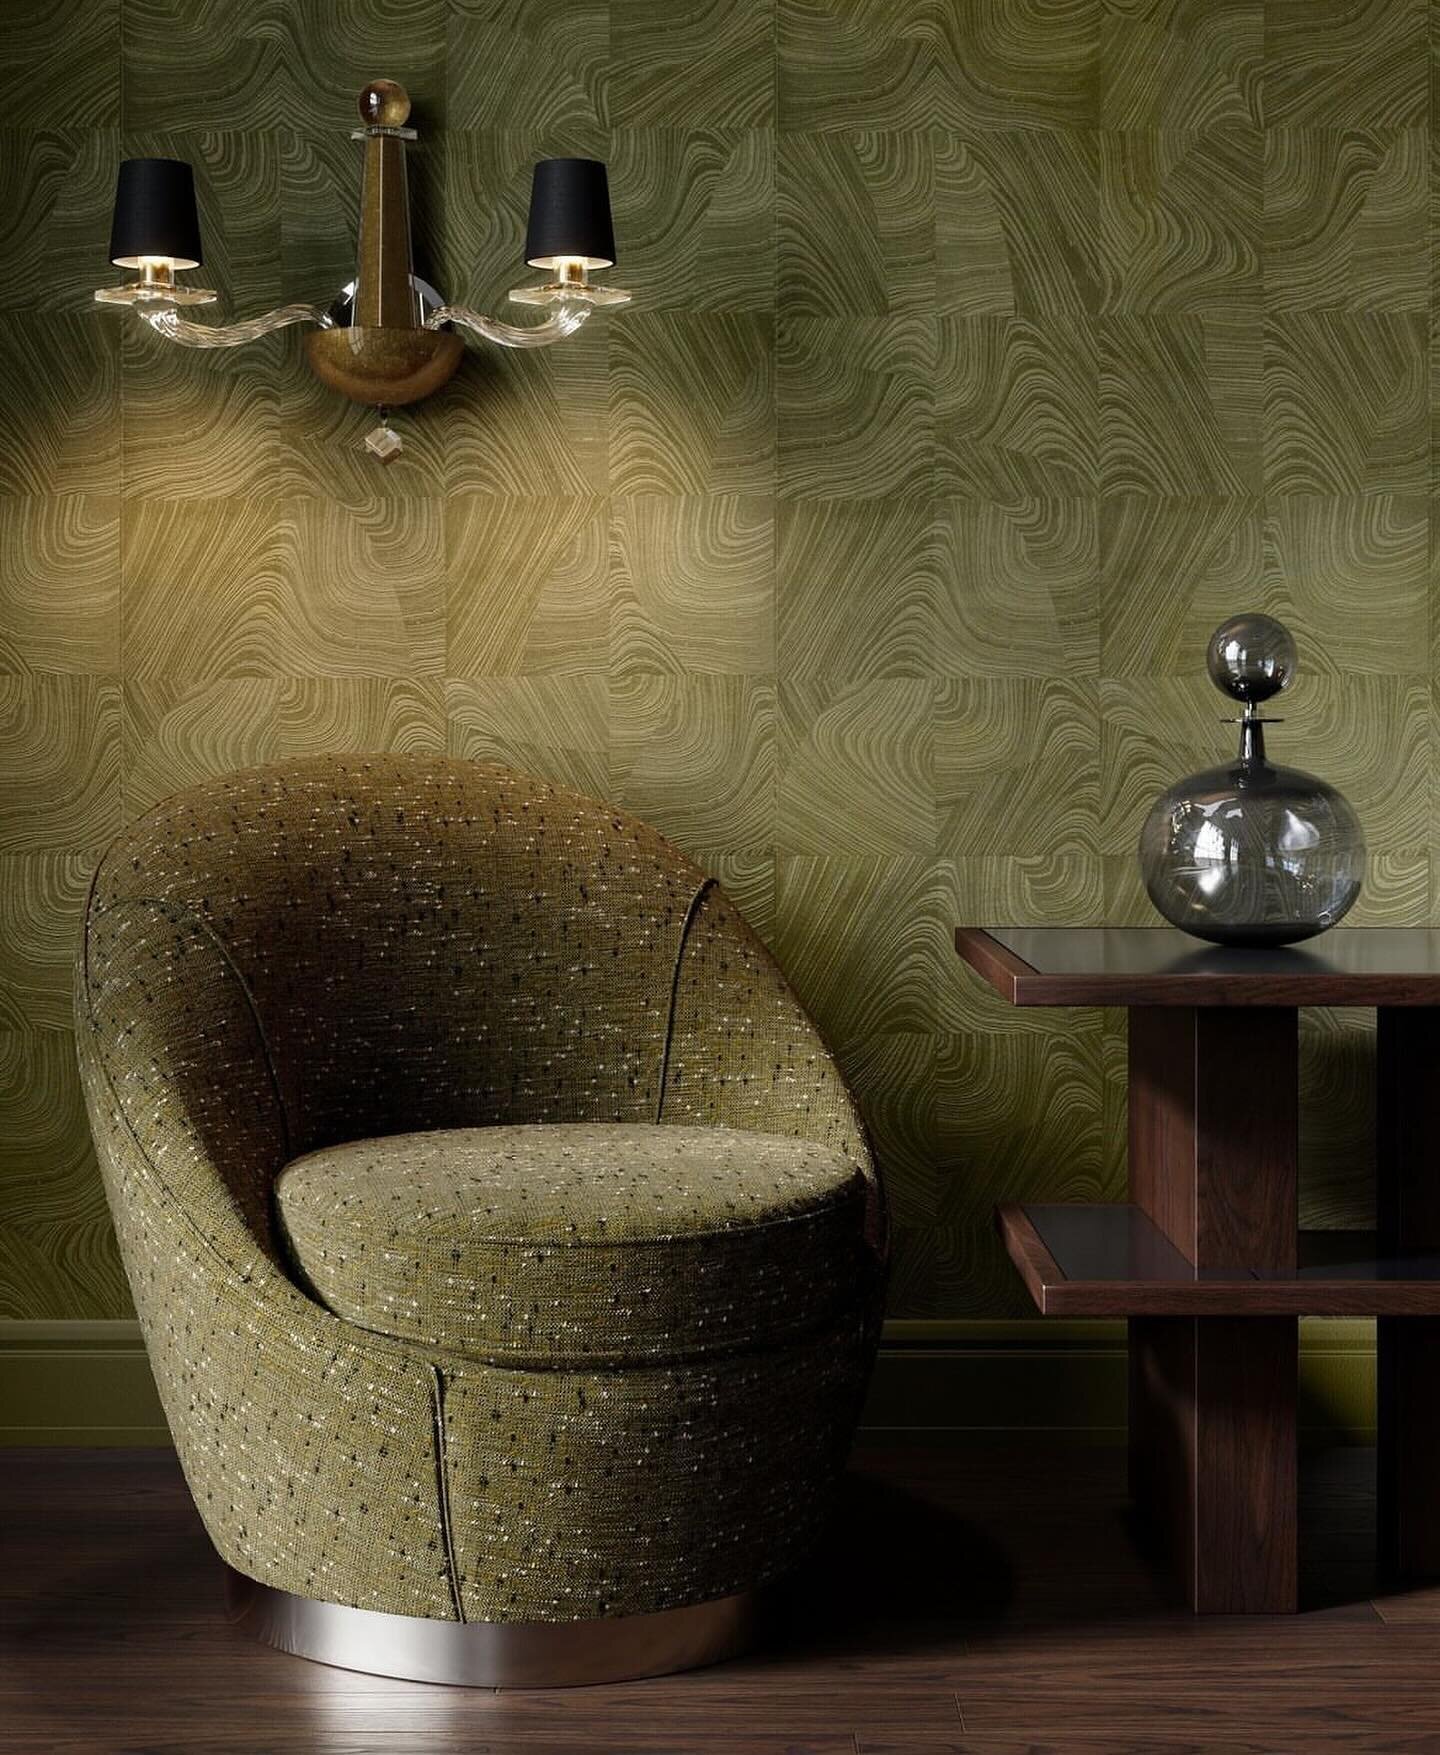 Founded by Angelo Donghia in the 1960&rsquo;s, Donghia fuses modern elegance &amp; international style to create timeless beauty for the home. Find the full selections of textiles and wall-coverings at our Zamalek showroom